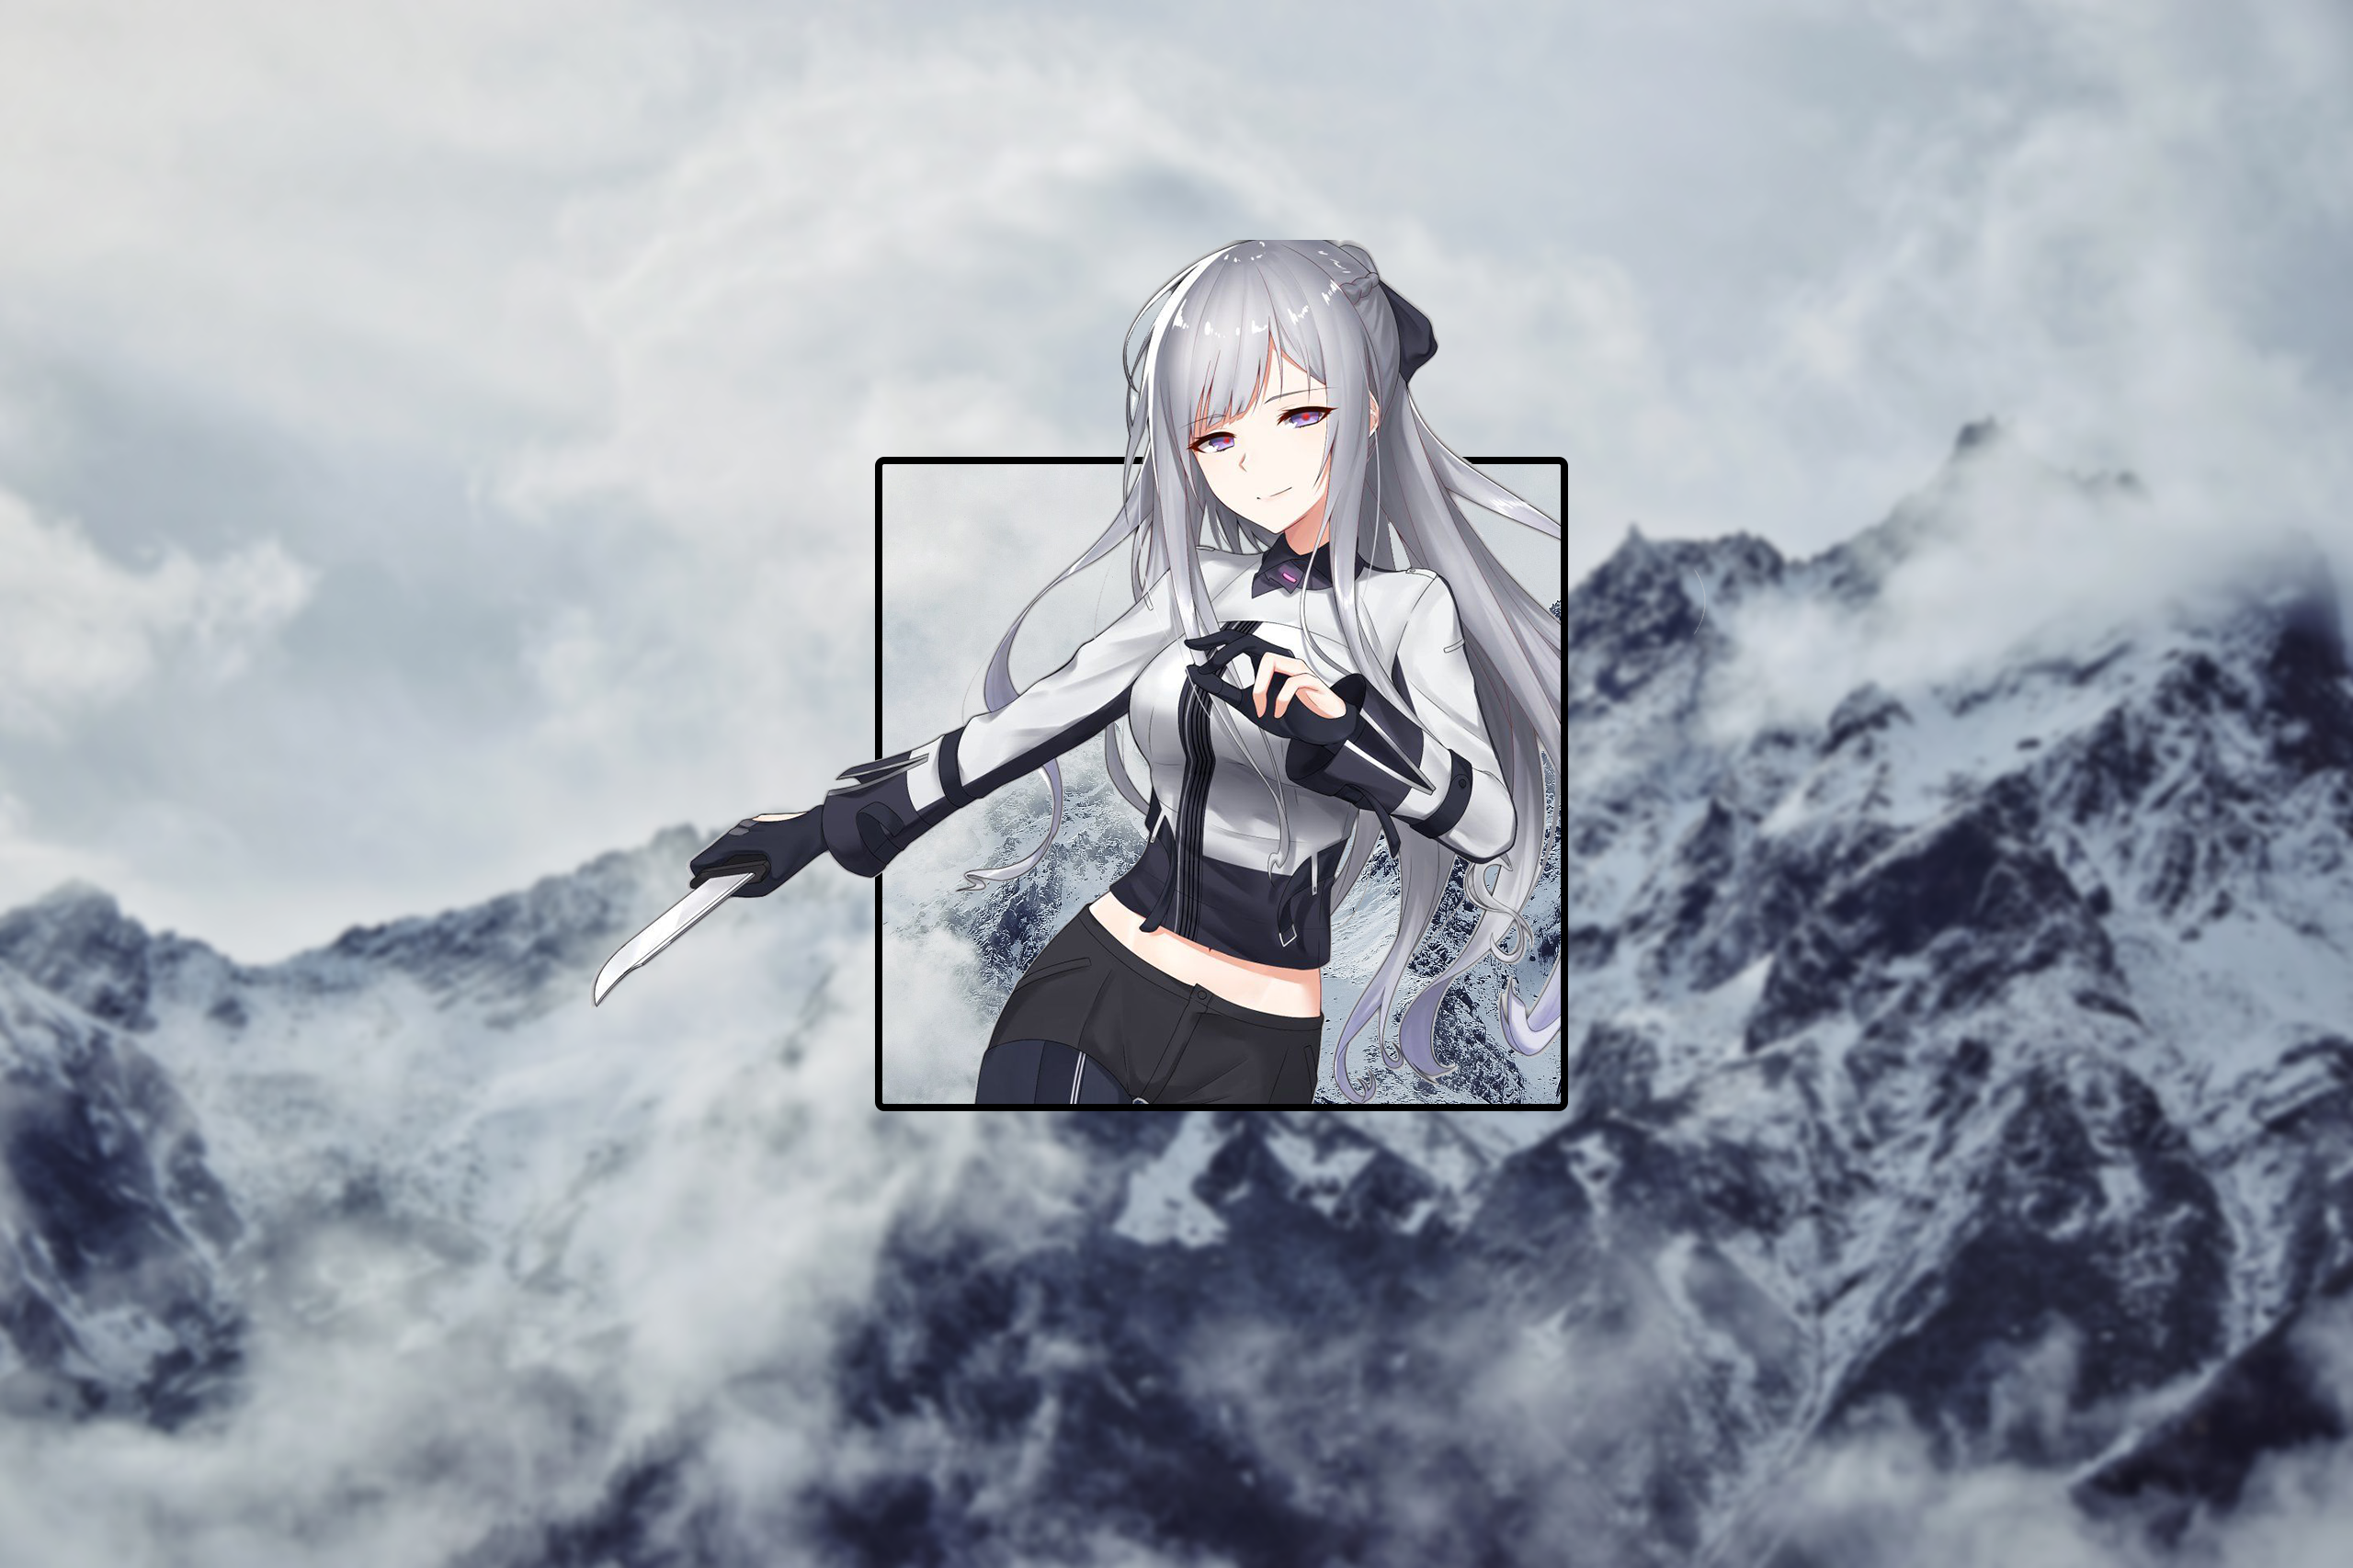 Anime 2560x1706 anime anime girls knife weapon long hair gray hair picture-in-picture